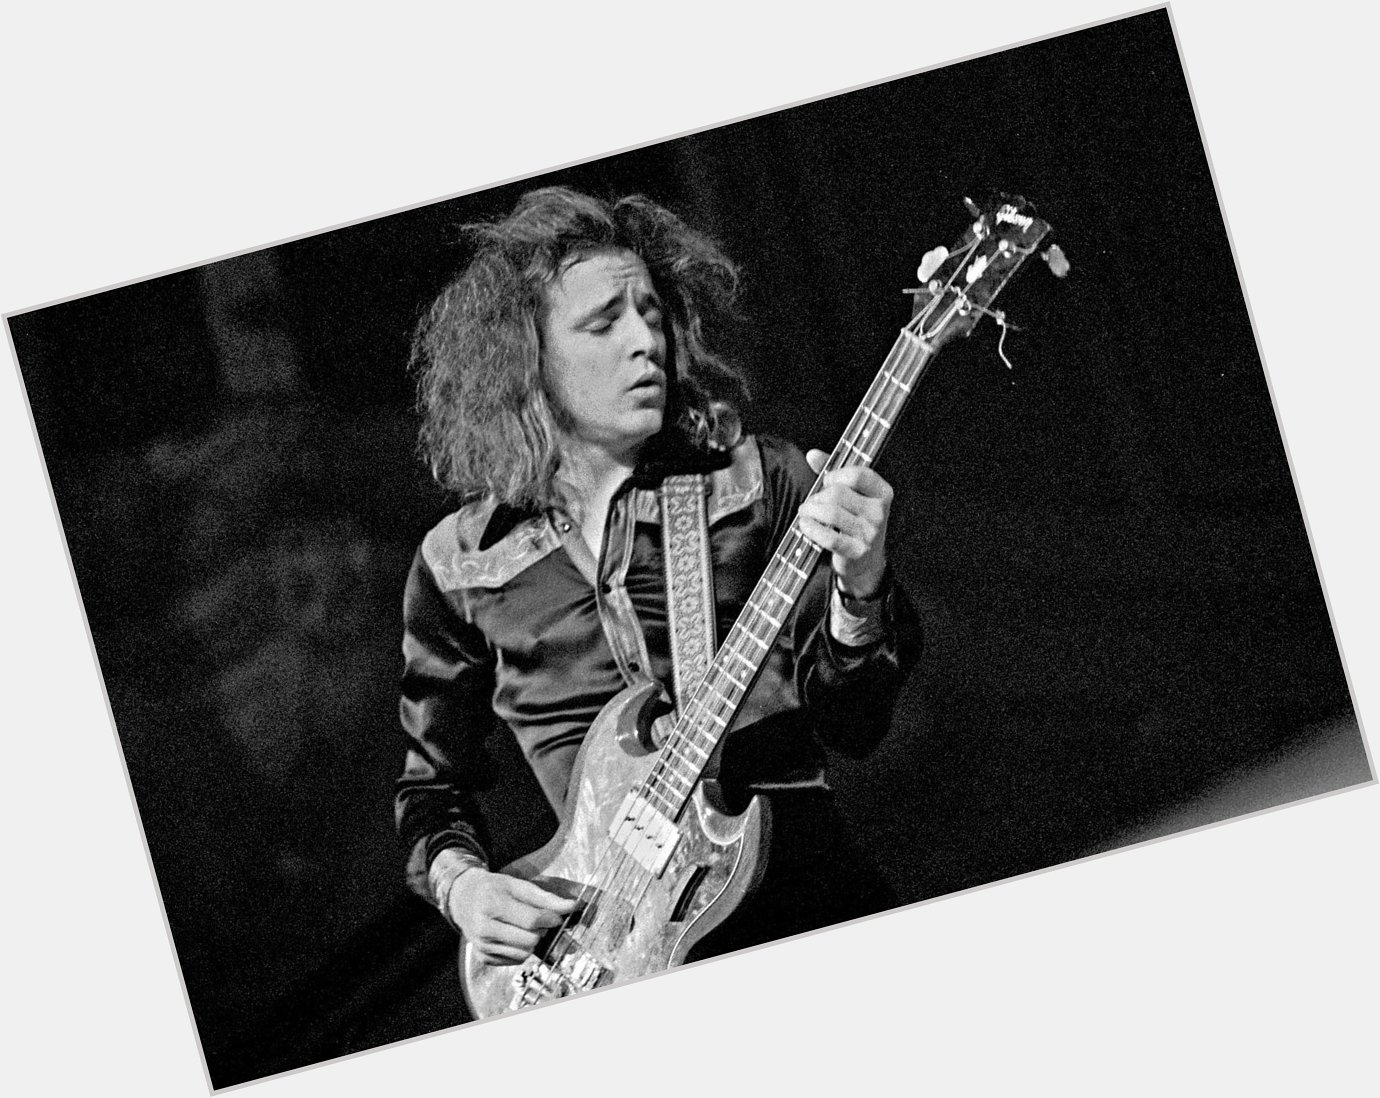 Happy birthday Jack Bruce
You may be gone but your music is forever. 